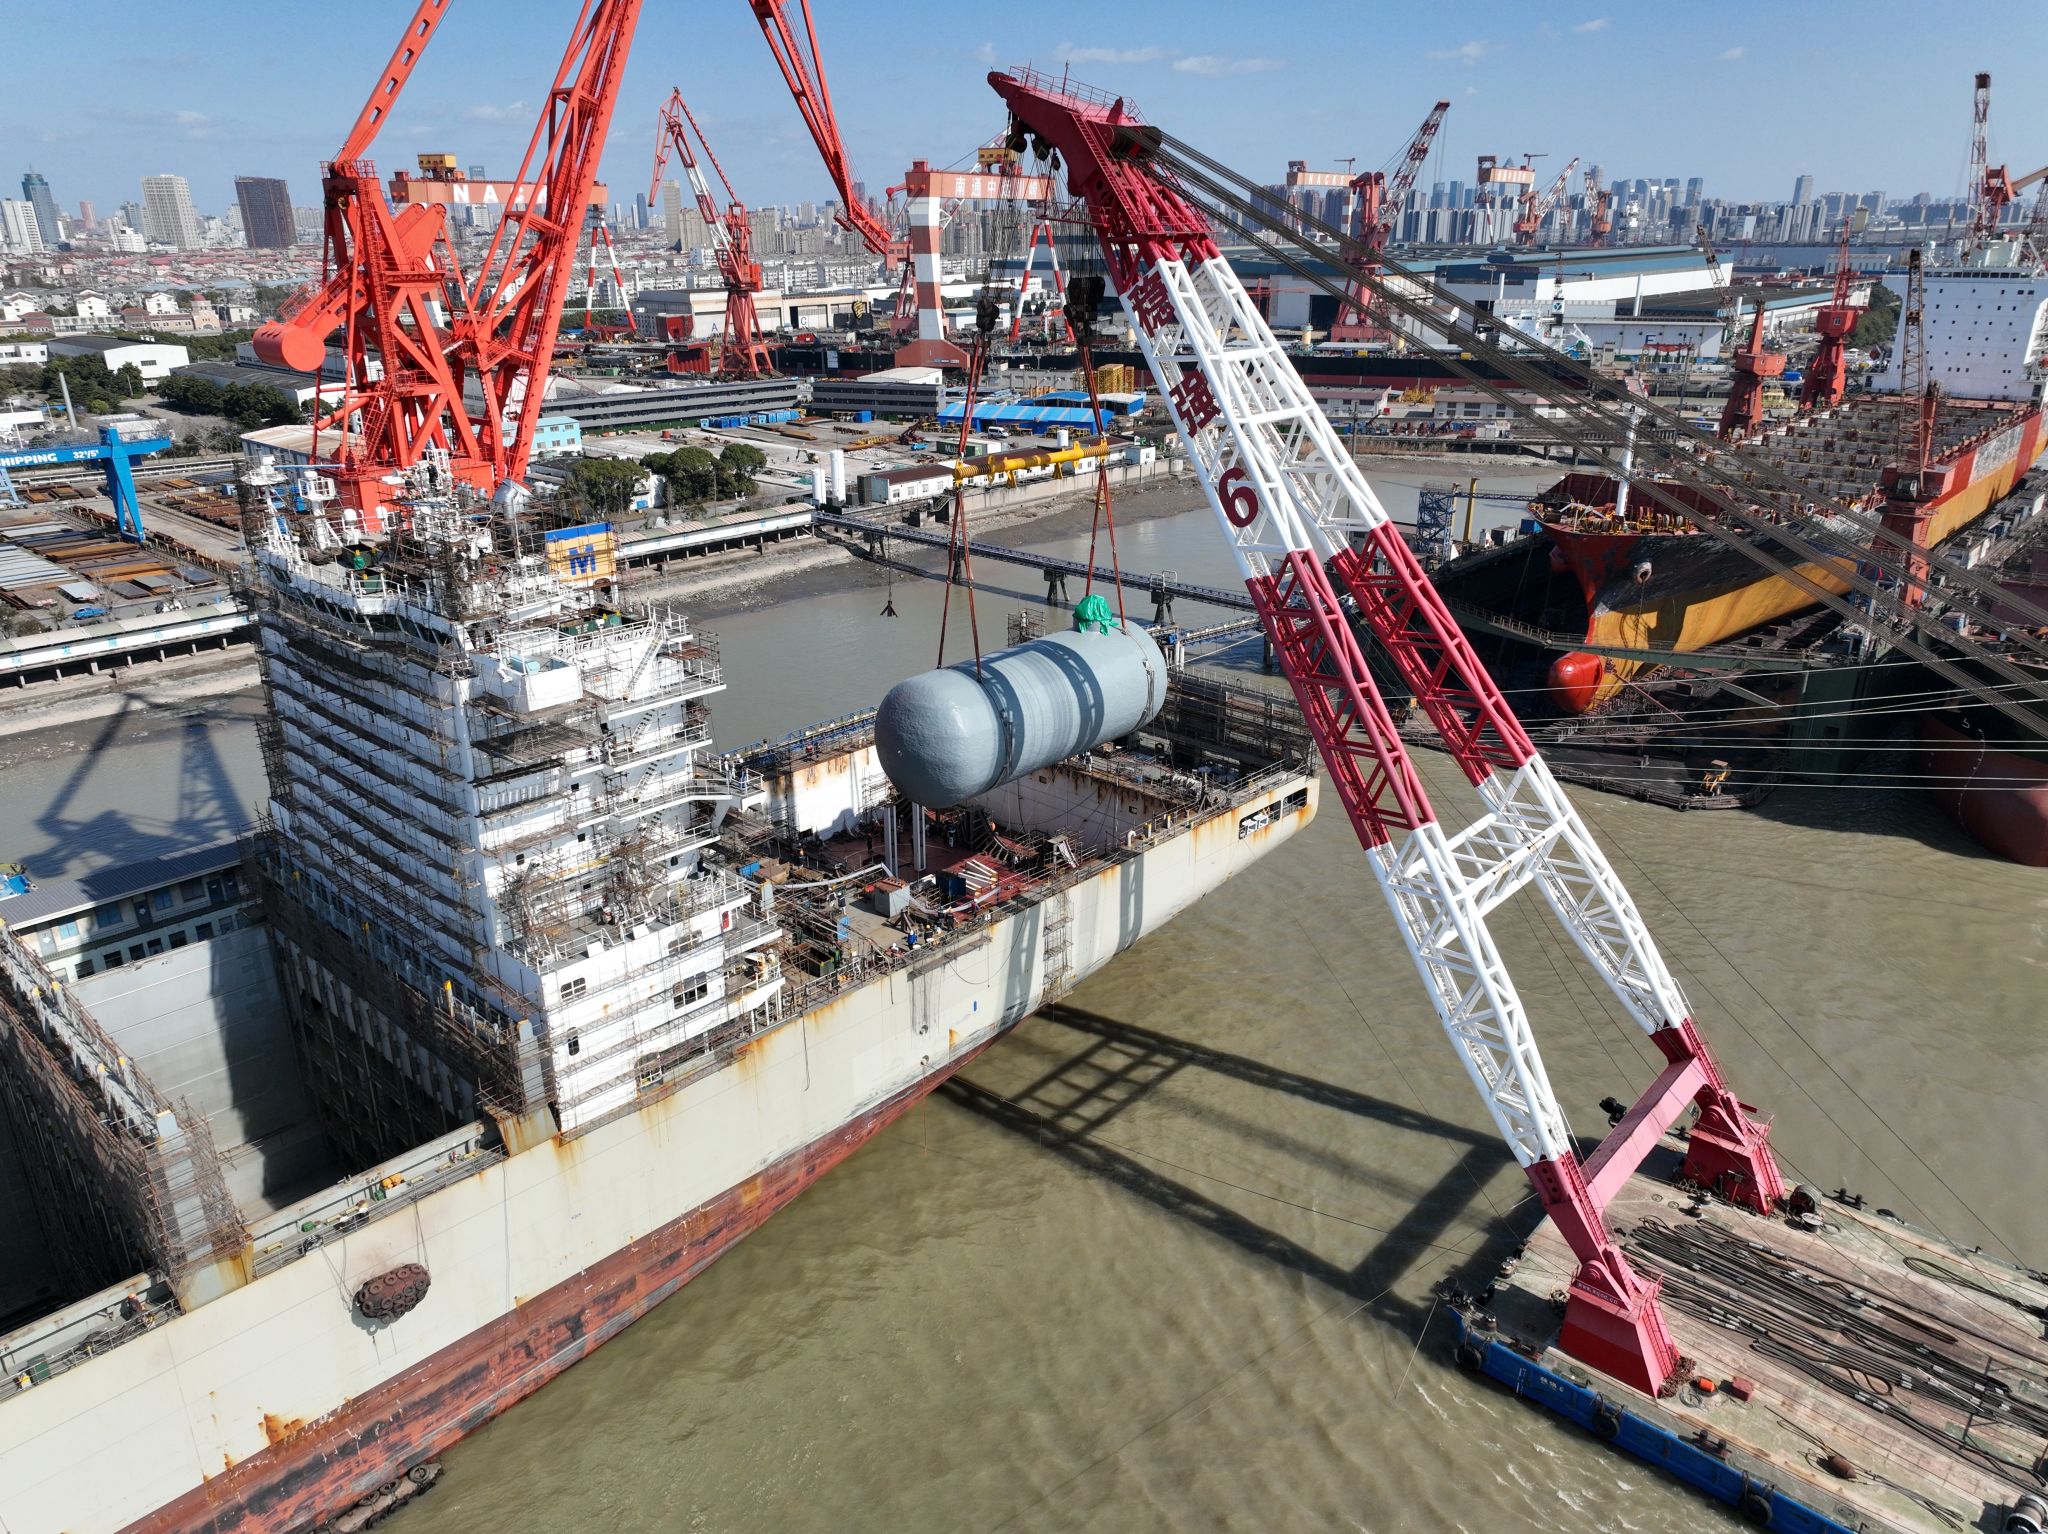 C-LNG Solutions wraps up FGSS job for Matson’s containership